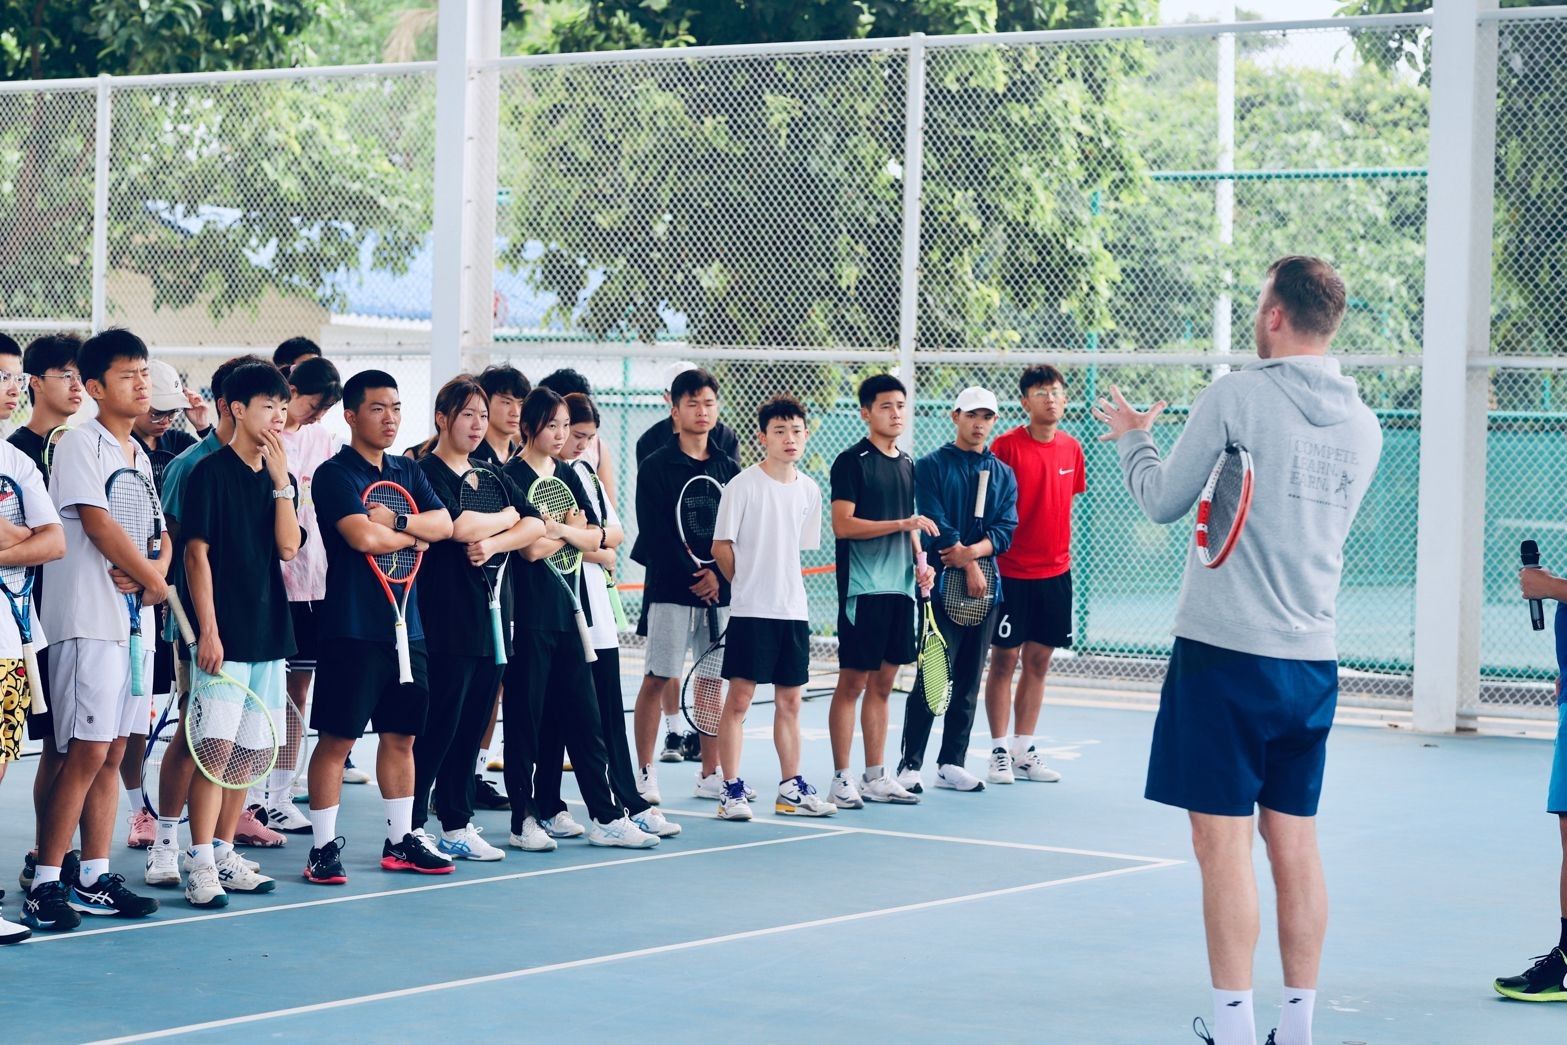 Our Tennis Coaching Courses Online | Master the Game